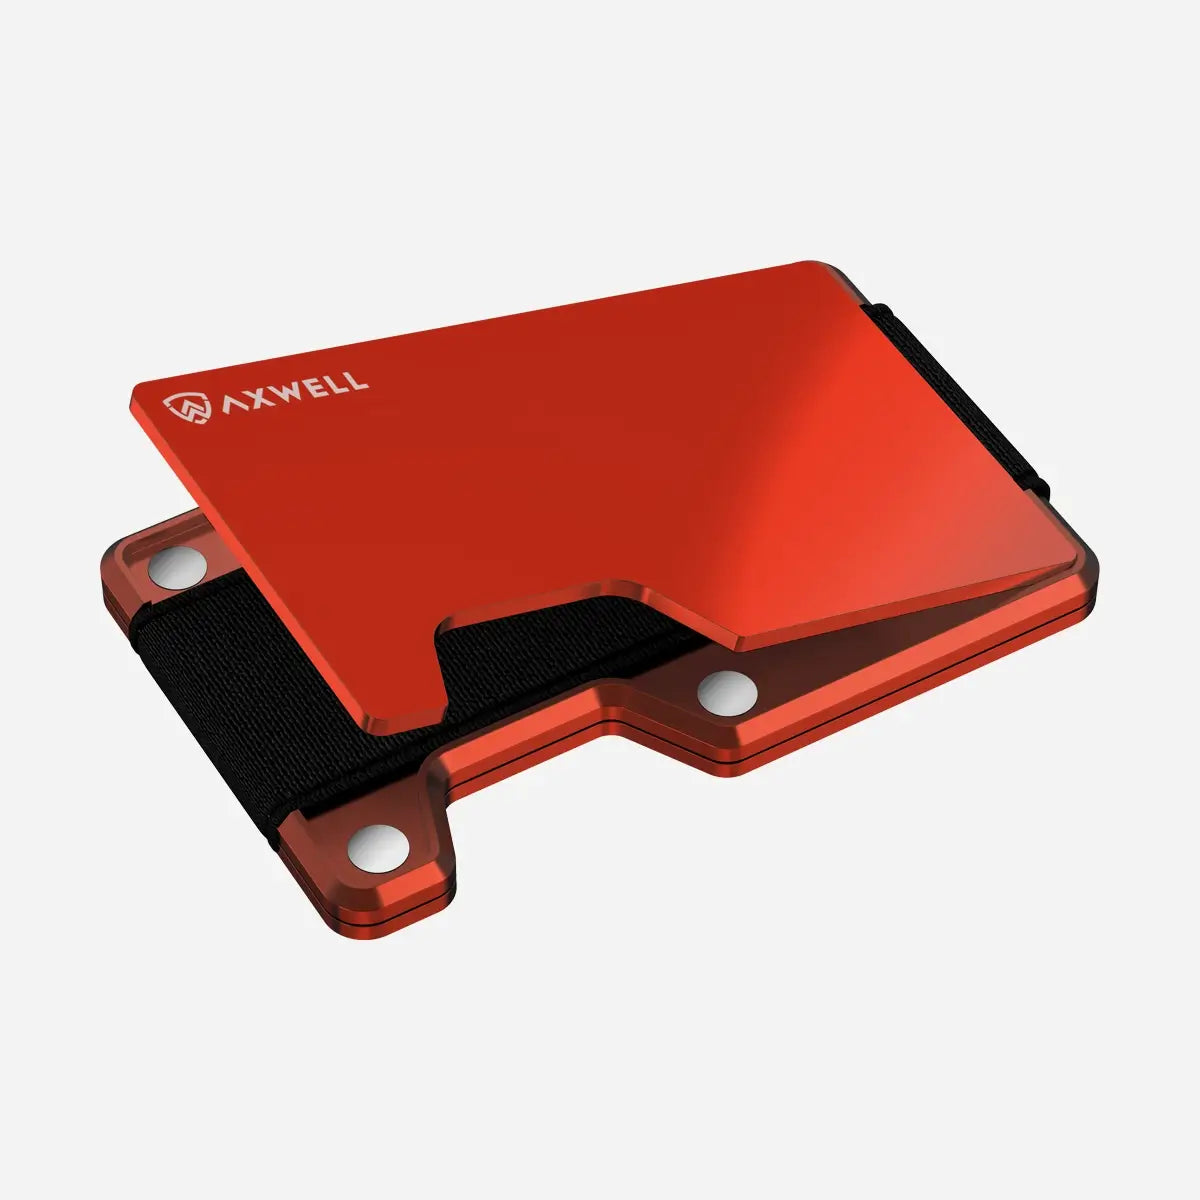 Axwell Wallet - Torch Red